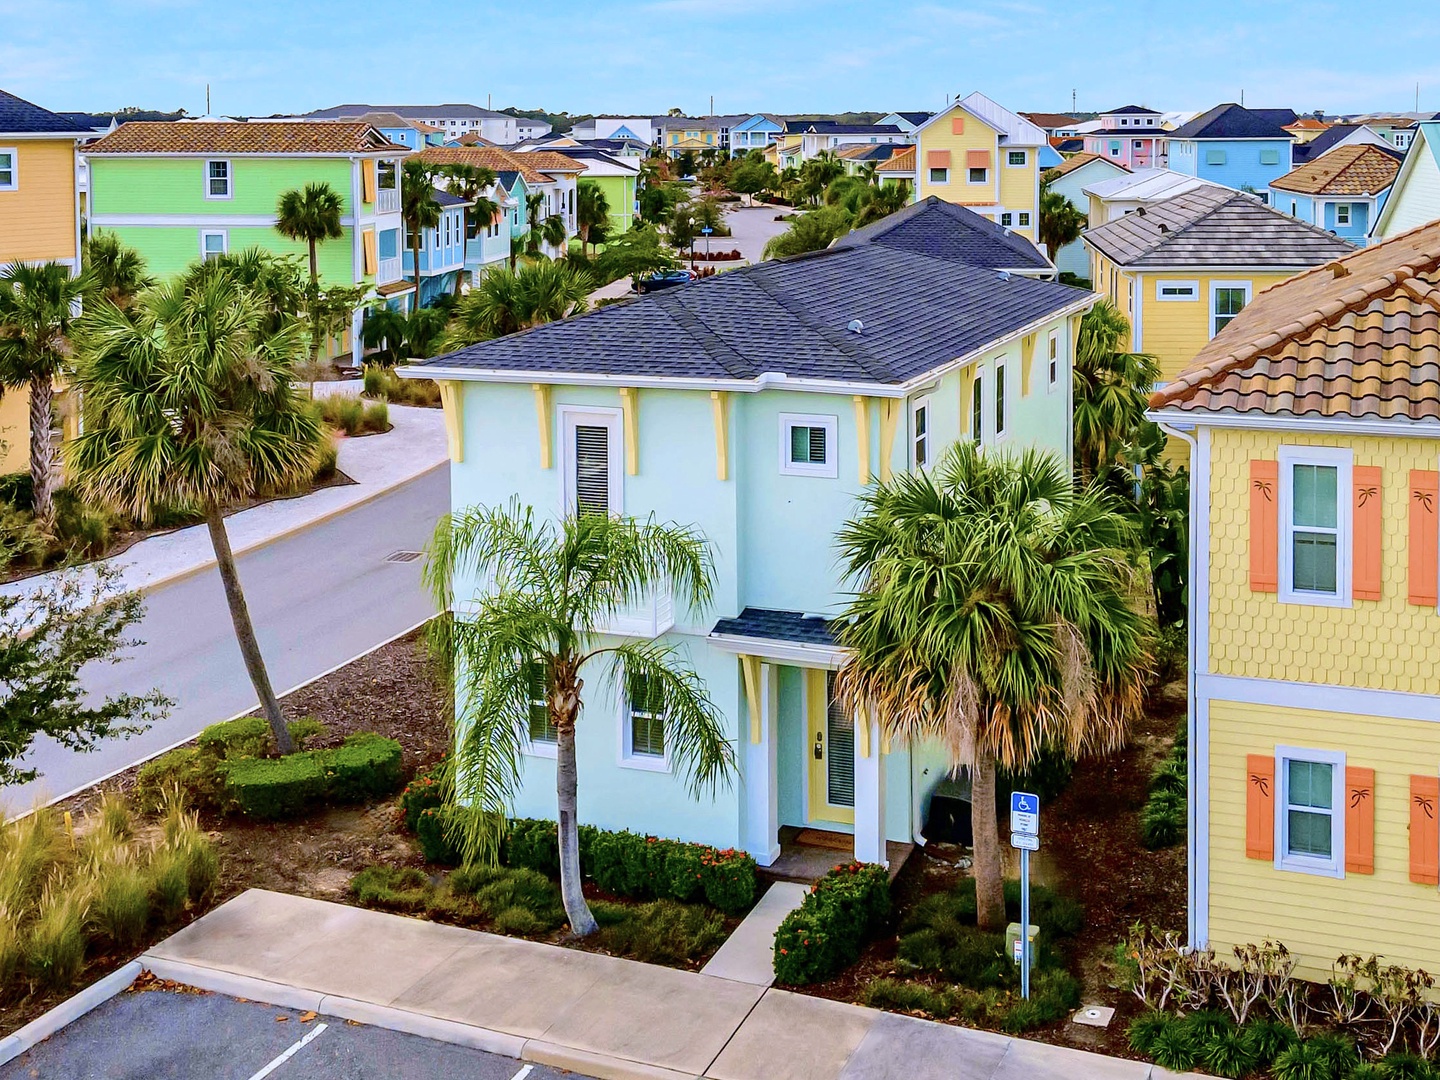 A charming seafoam green cottage on a spacious corner lot in the vibrant Margaritaville Resort